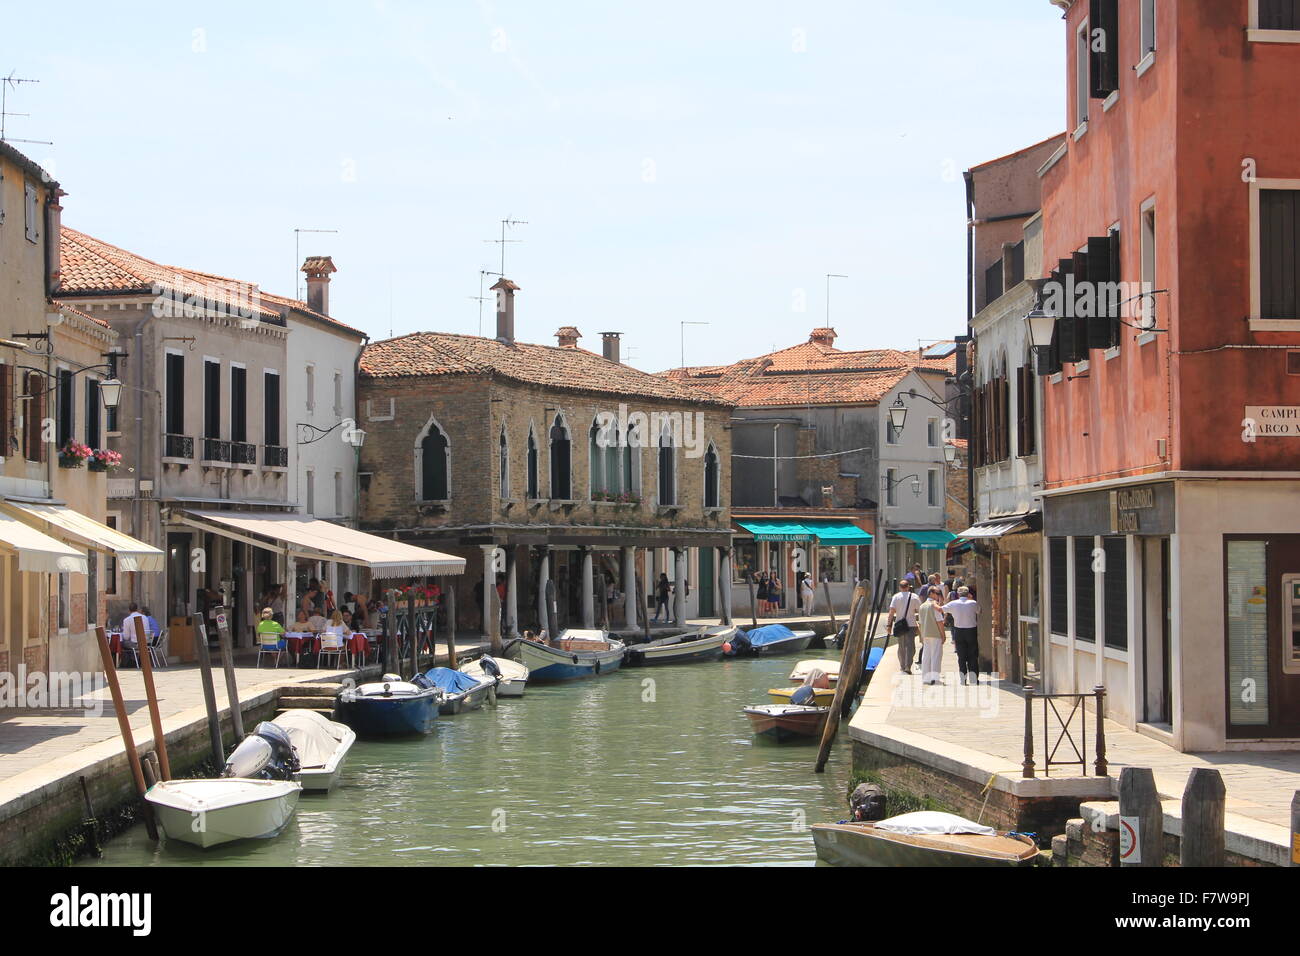 Murano, Italy, June 6 2014: Tyical view of the little island of Murano, near Venice, famous for its colored house and canals Stock Photo